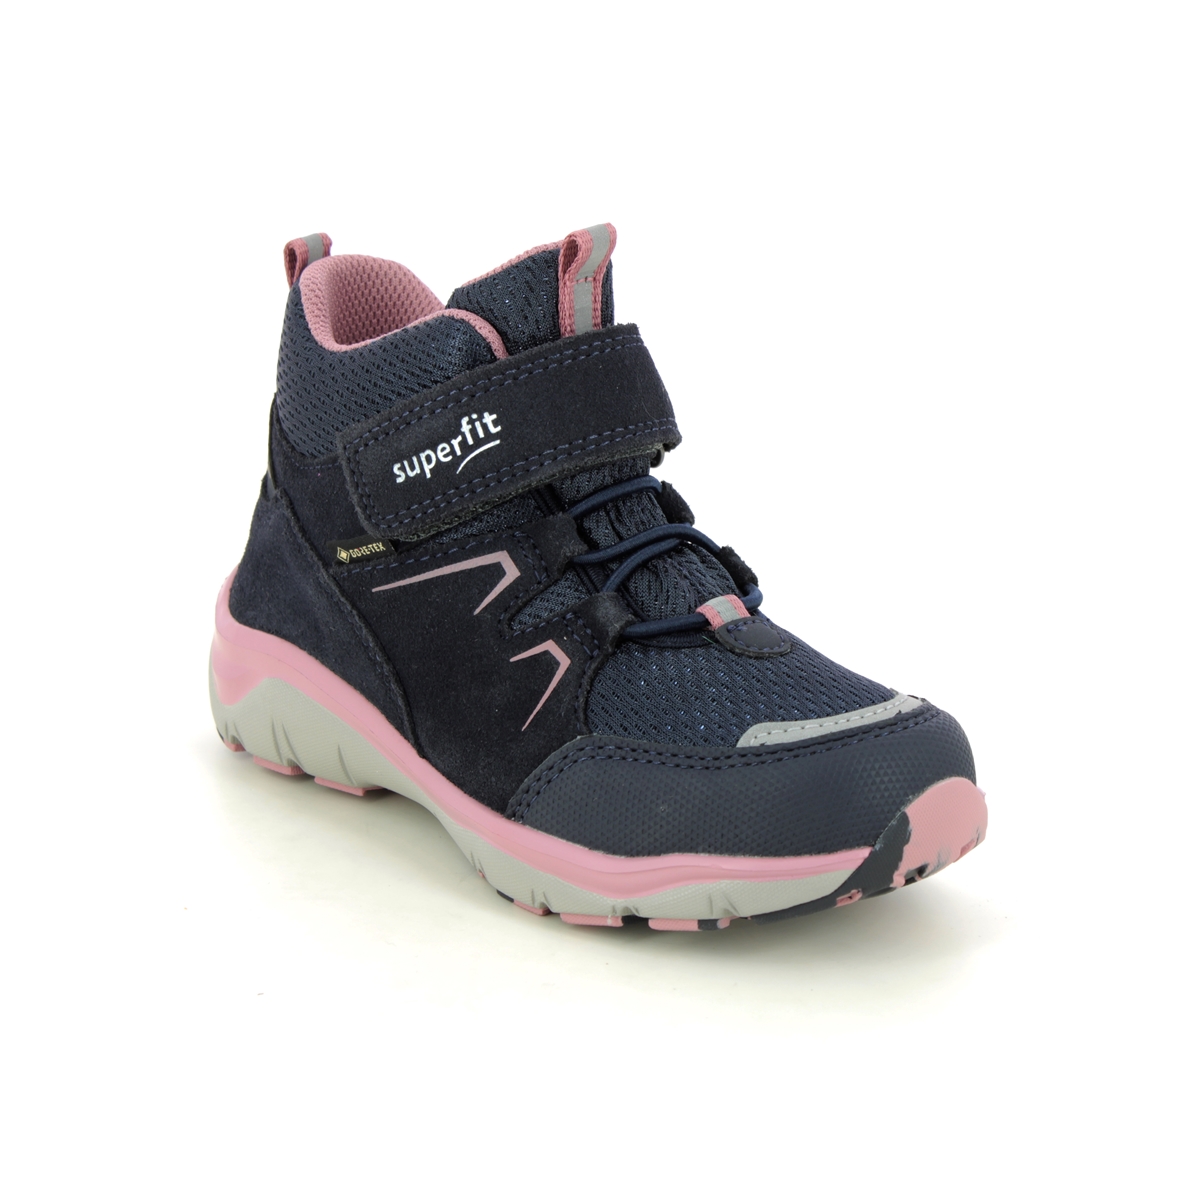 Superfit Sport5 Gore Tex Navy Pink Kids Girls Boots 1000243-8010 In Size 32 In Plain Navy Pink For kids